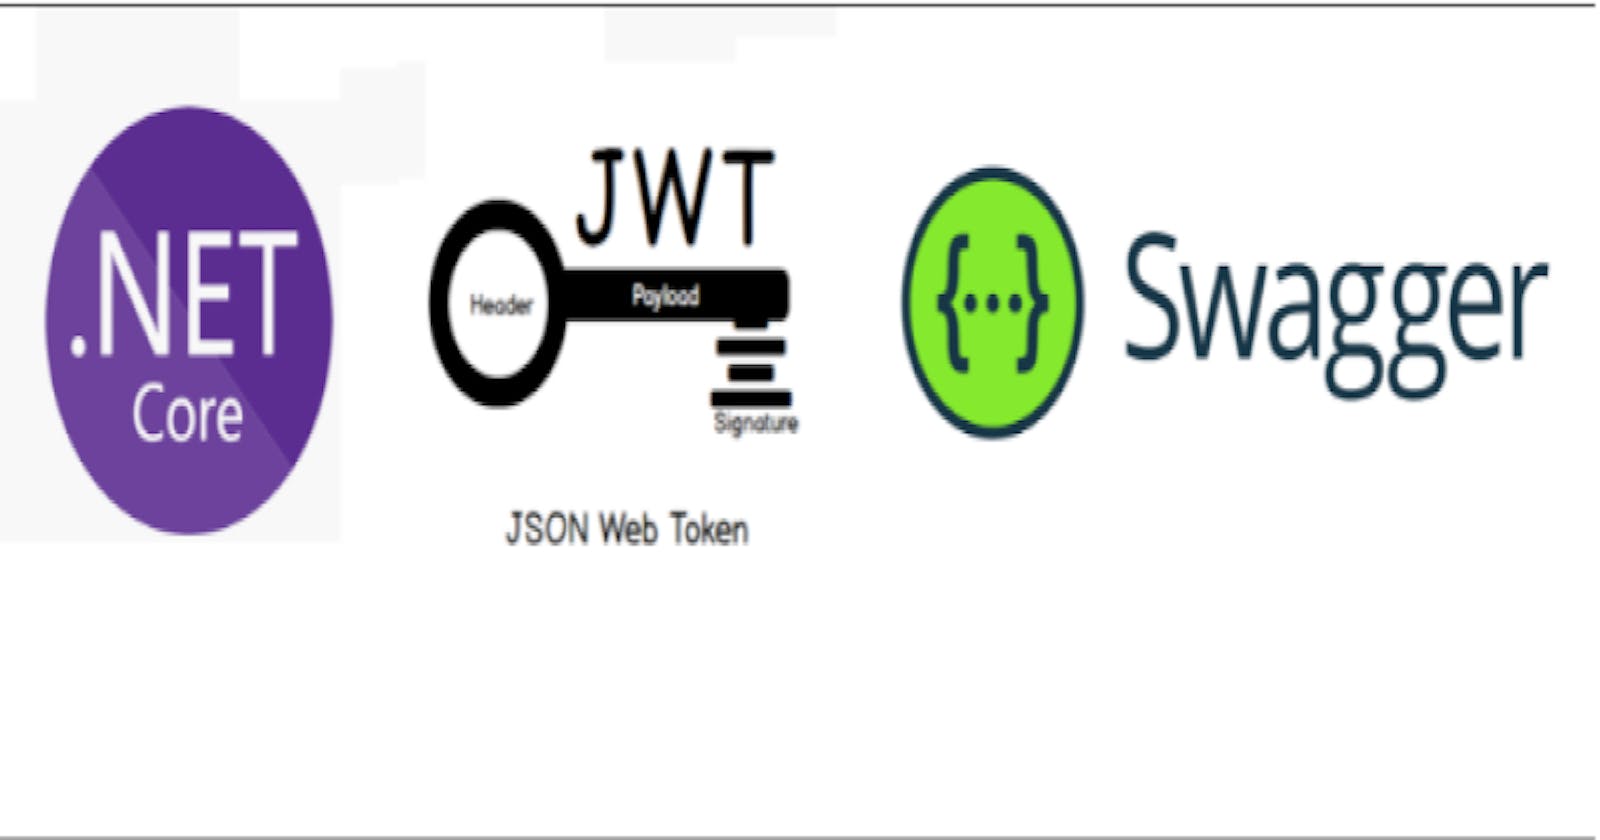 Authentication And Authorization In .NET Core Web API Using JWT Token And Swagger UI